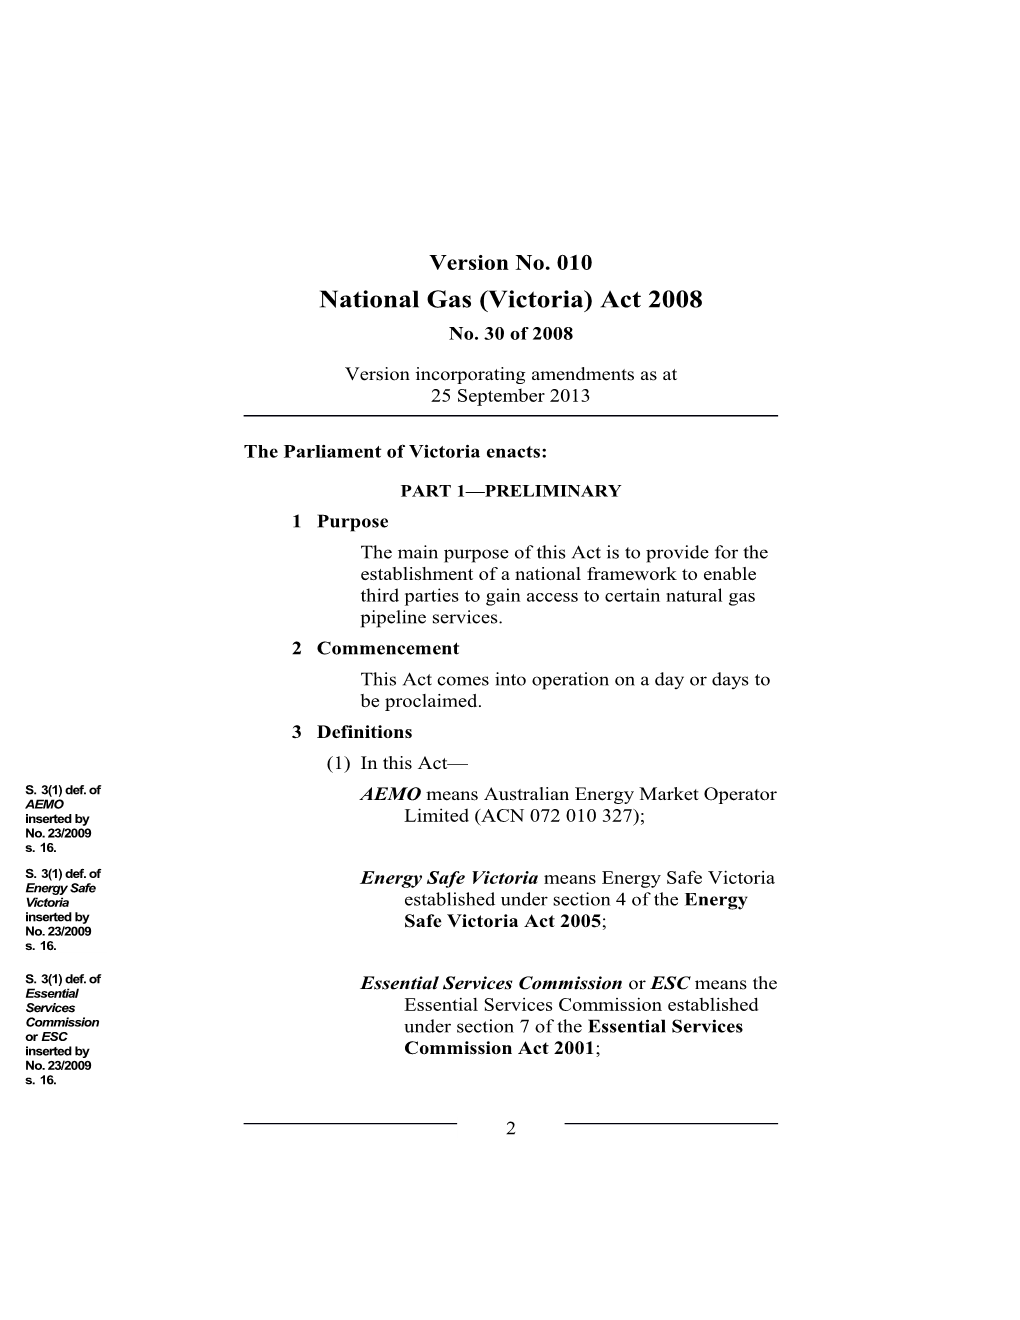 National Gas (Victoria) Act 2008